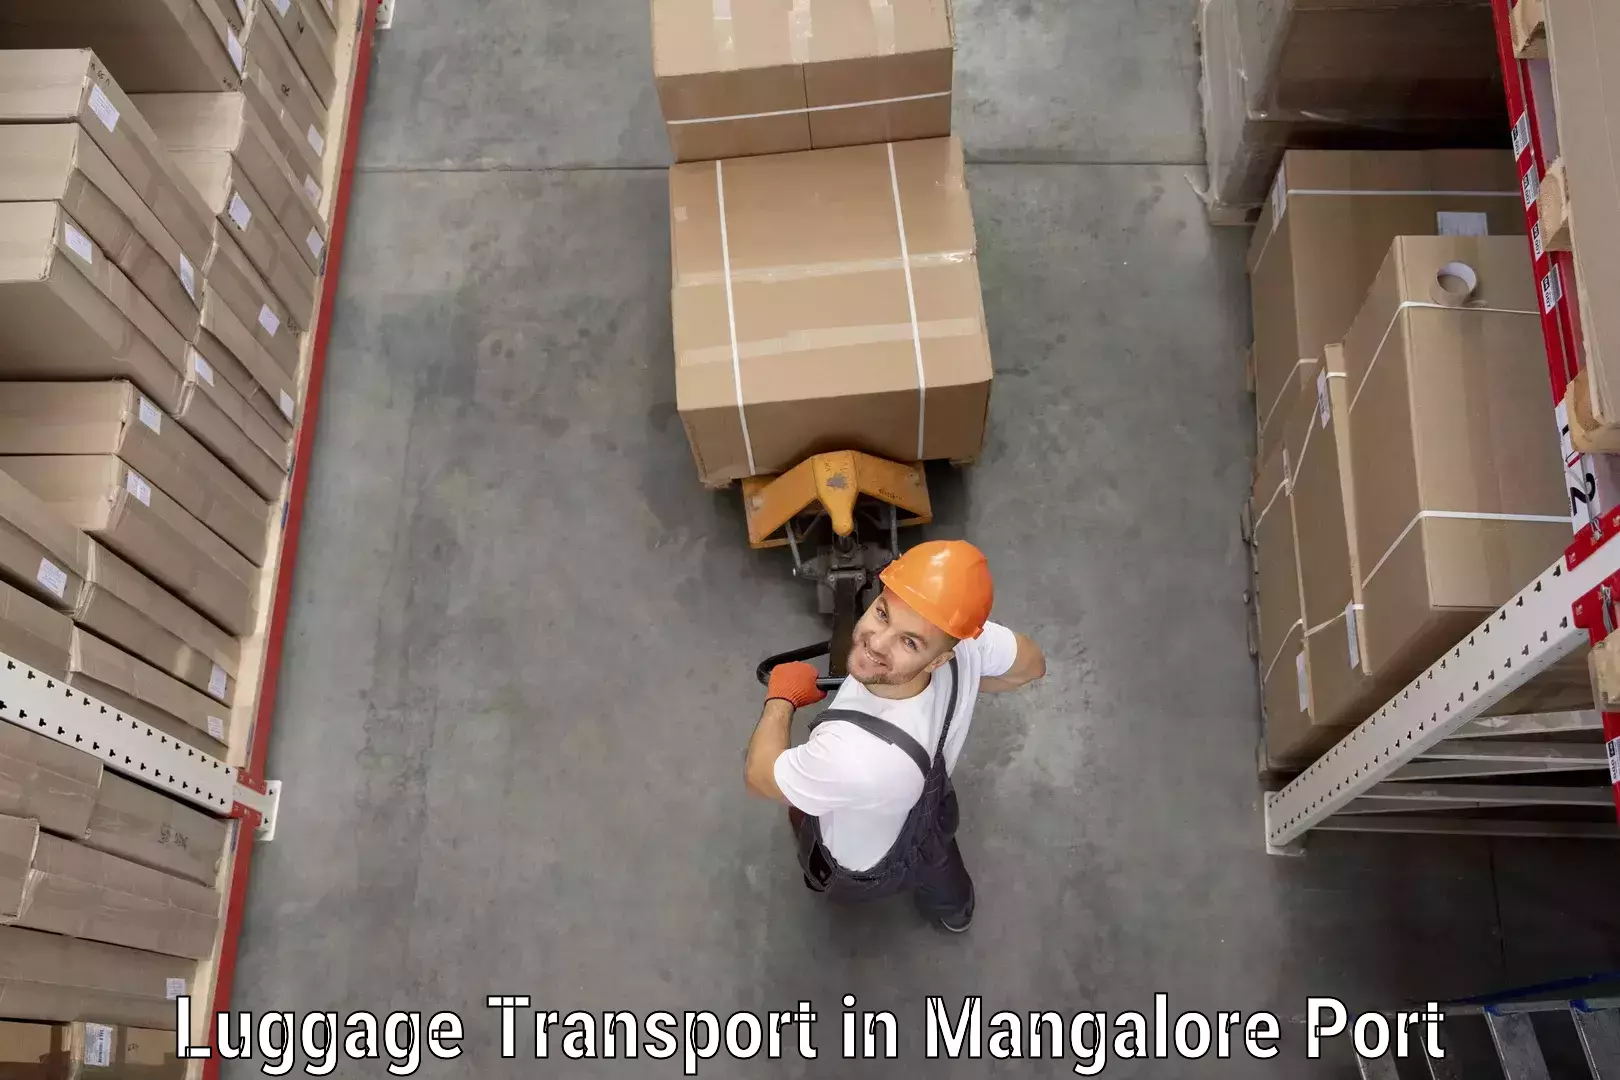 Baggage shipping schedule in Mangalore Port